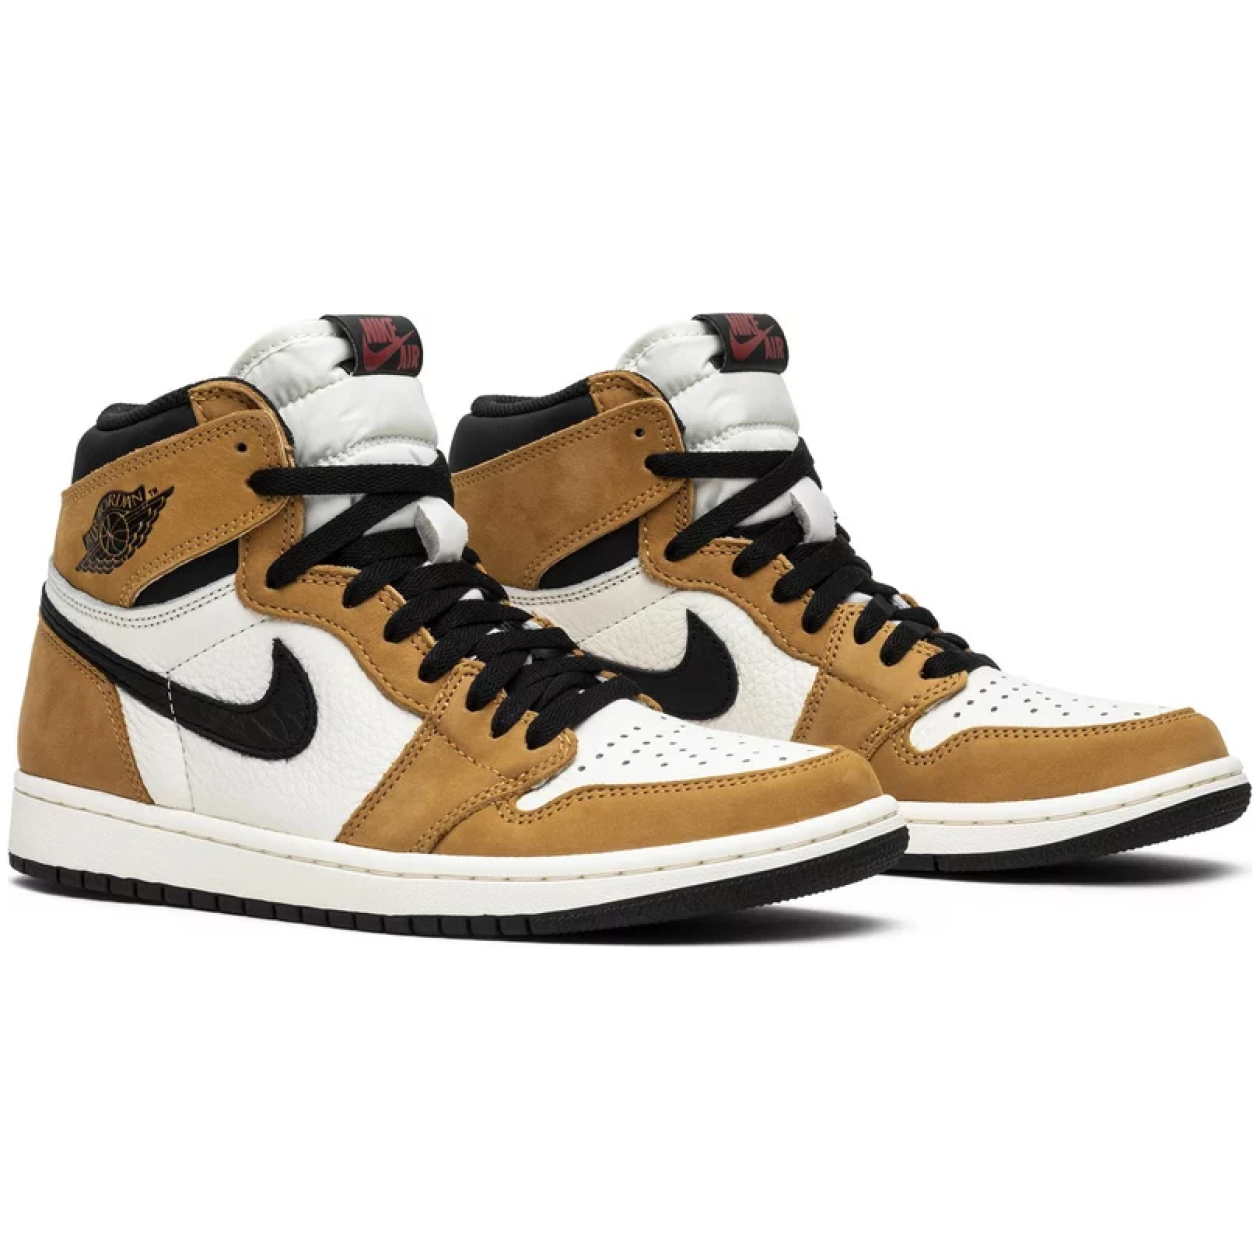 Air Jordan 1 Retro High OG Rookie of the Year – Sneakers Joint